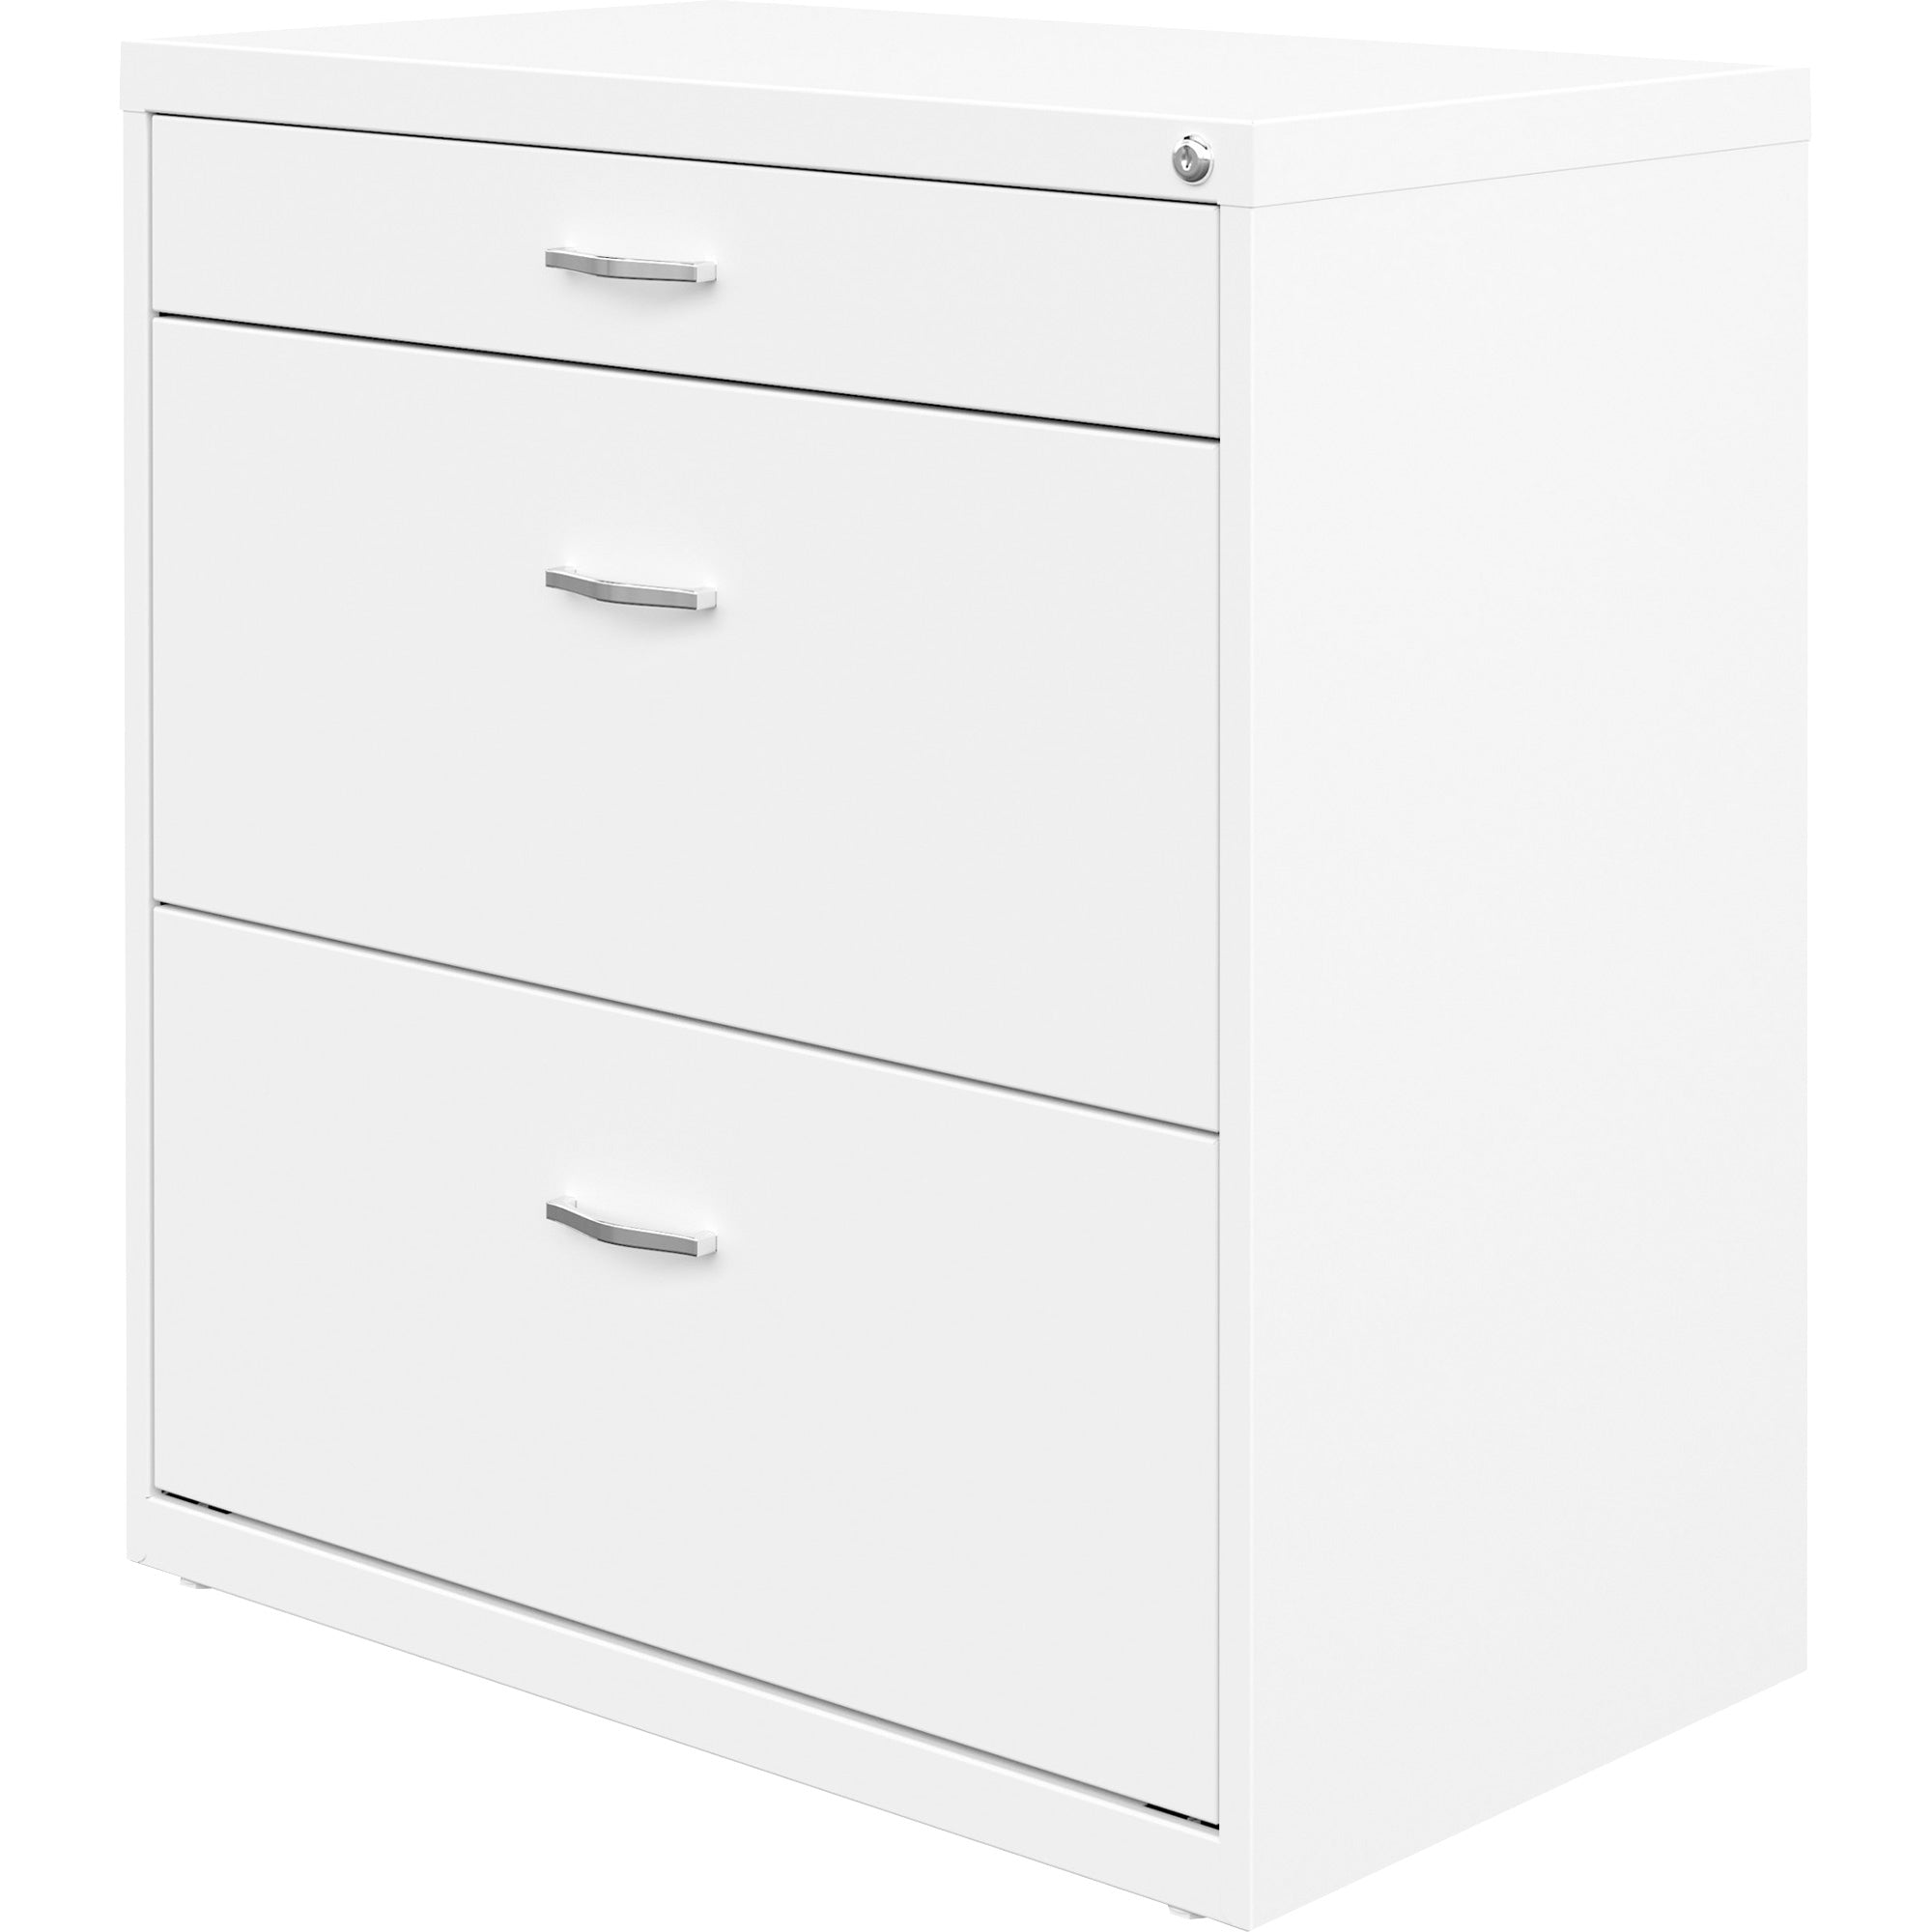 nusparc-pencil-drawer-lateral-file-30-x-176-x-317-2-x-drawers-for-file-pencil-letter-lateral-interlocking-anti-tip-ball-bearing-slide-ball-bearing-suspension-removable-lock-durable-nonporous-surface-adjustable-leveler-white_nprlf318bbwe - 3